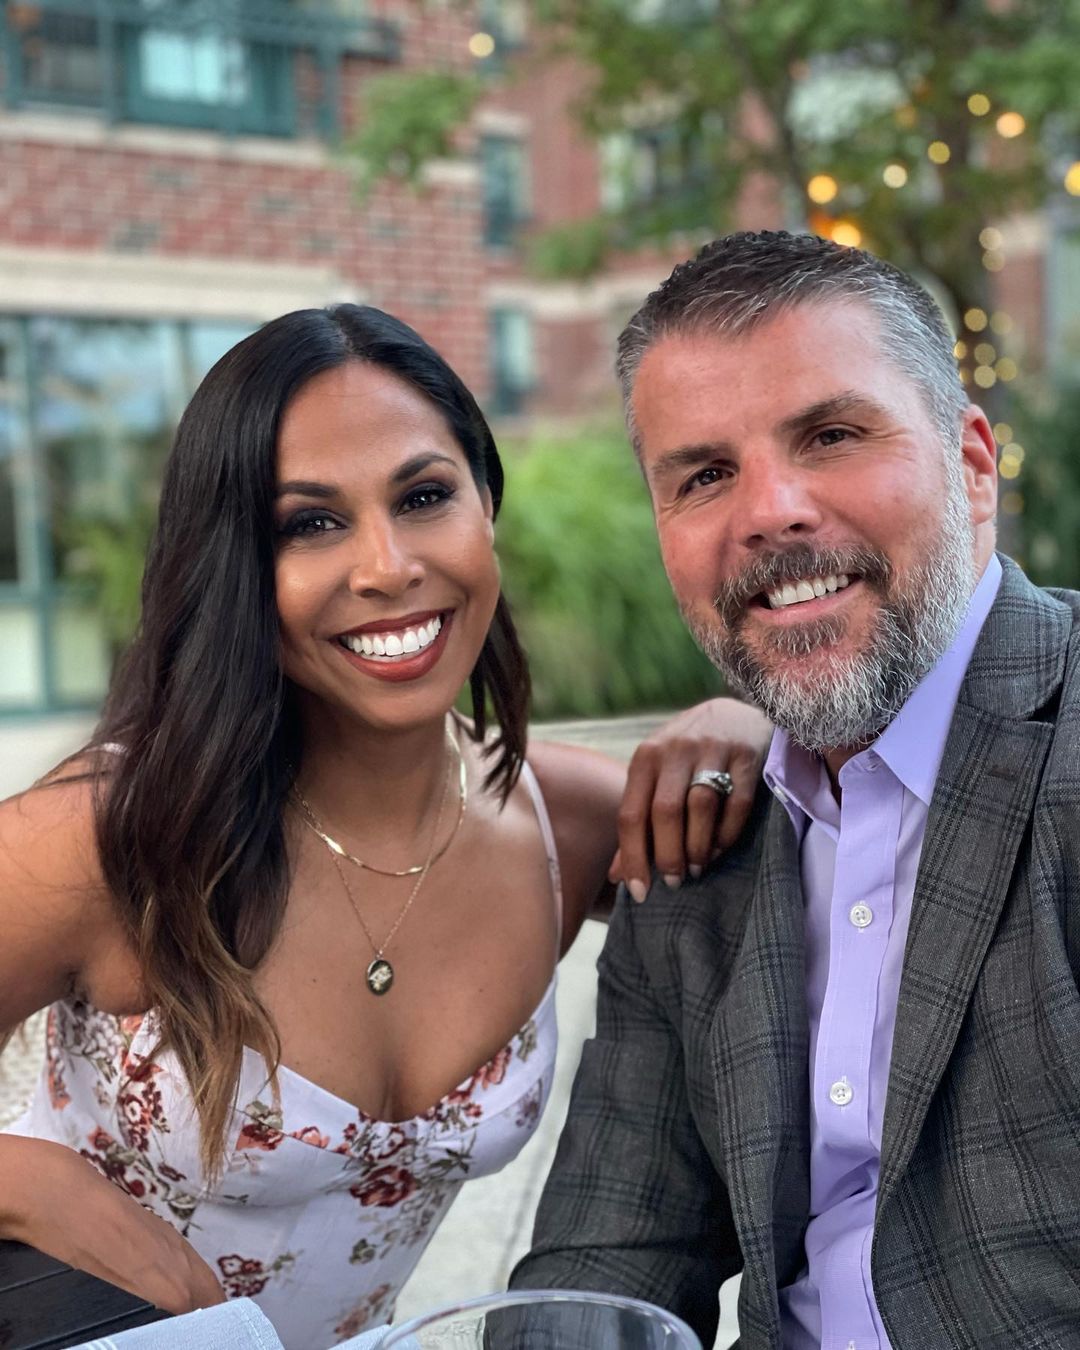 Taniya Nayak shares a special bond with her husband, Brian O'Donnell.